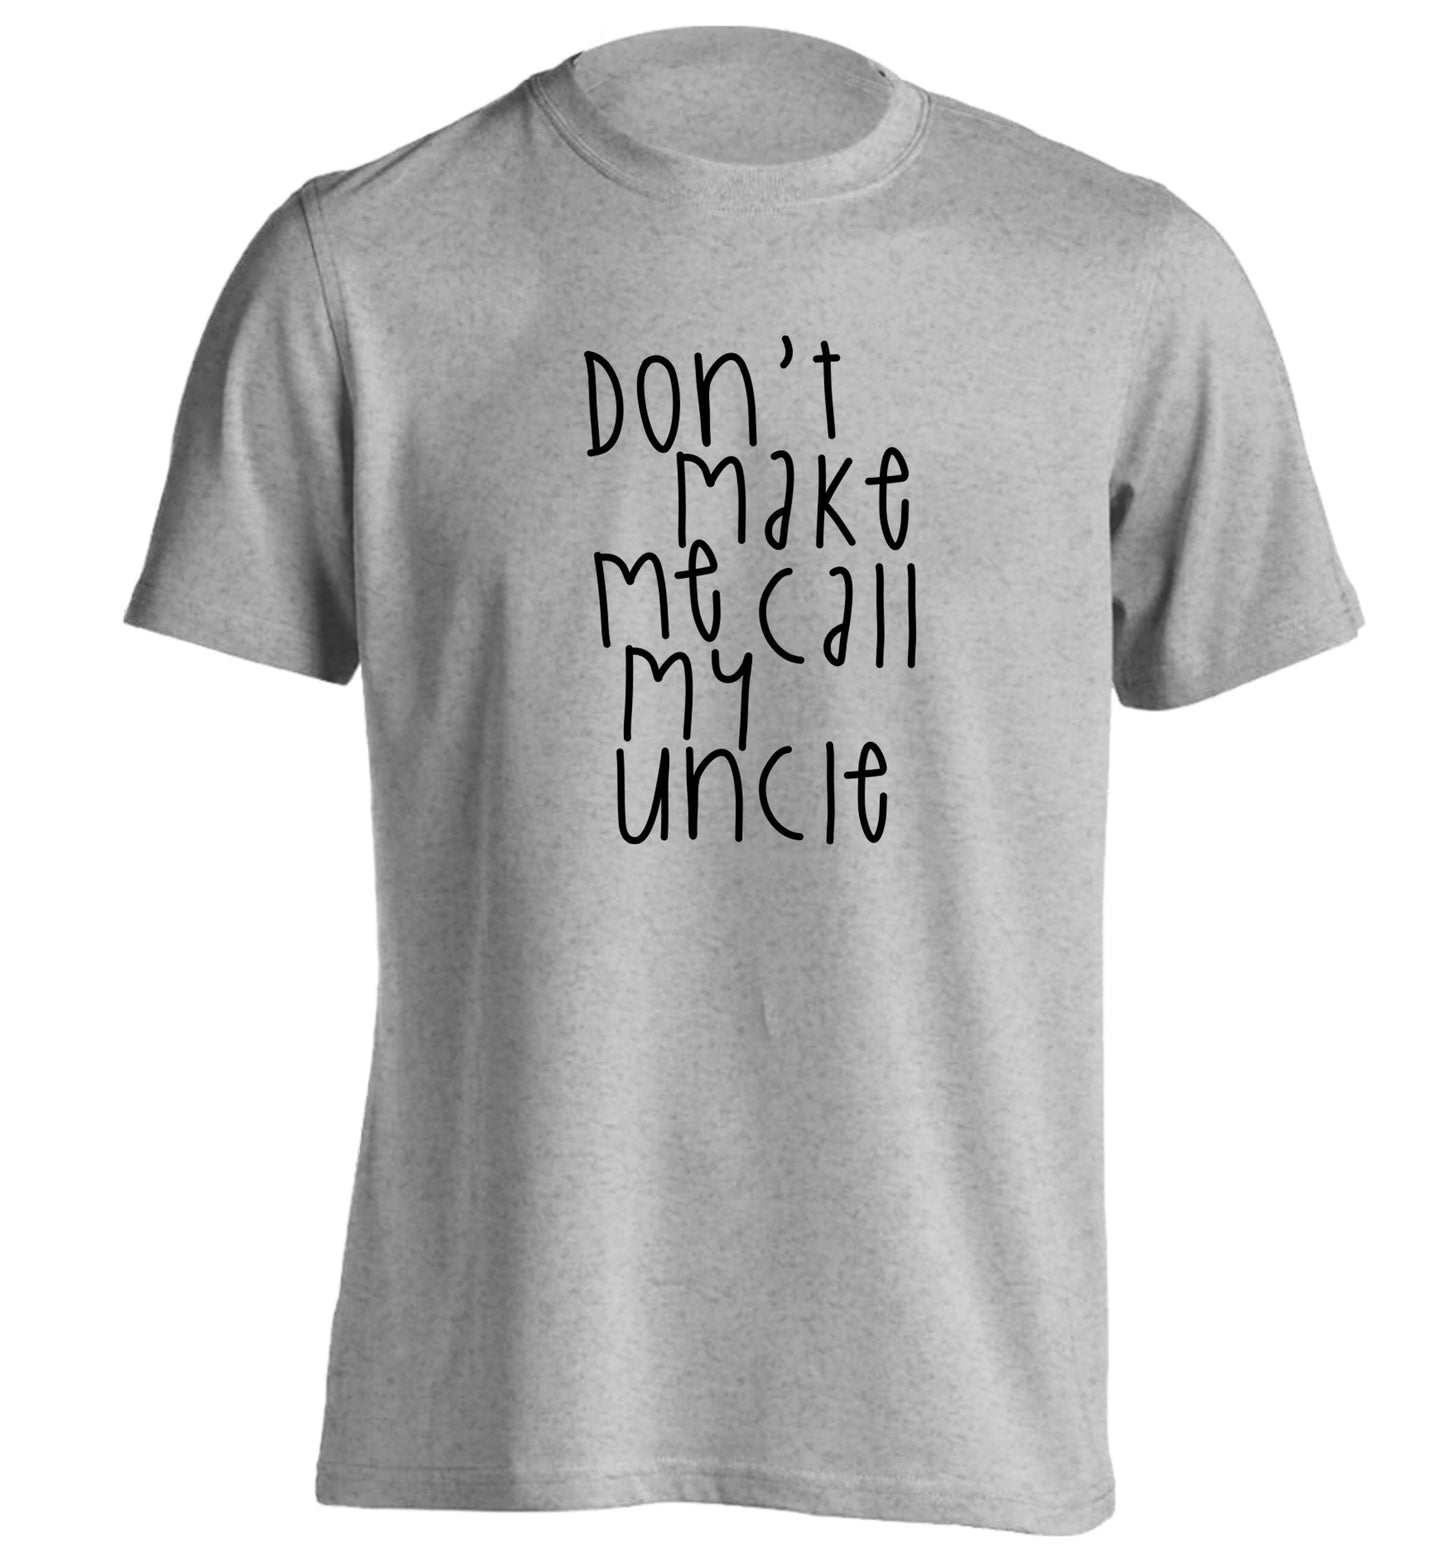 Don't make me call my uncle adults unisex grey Tshirt 2XL